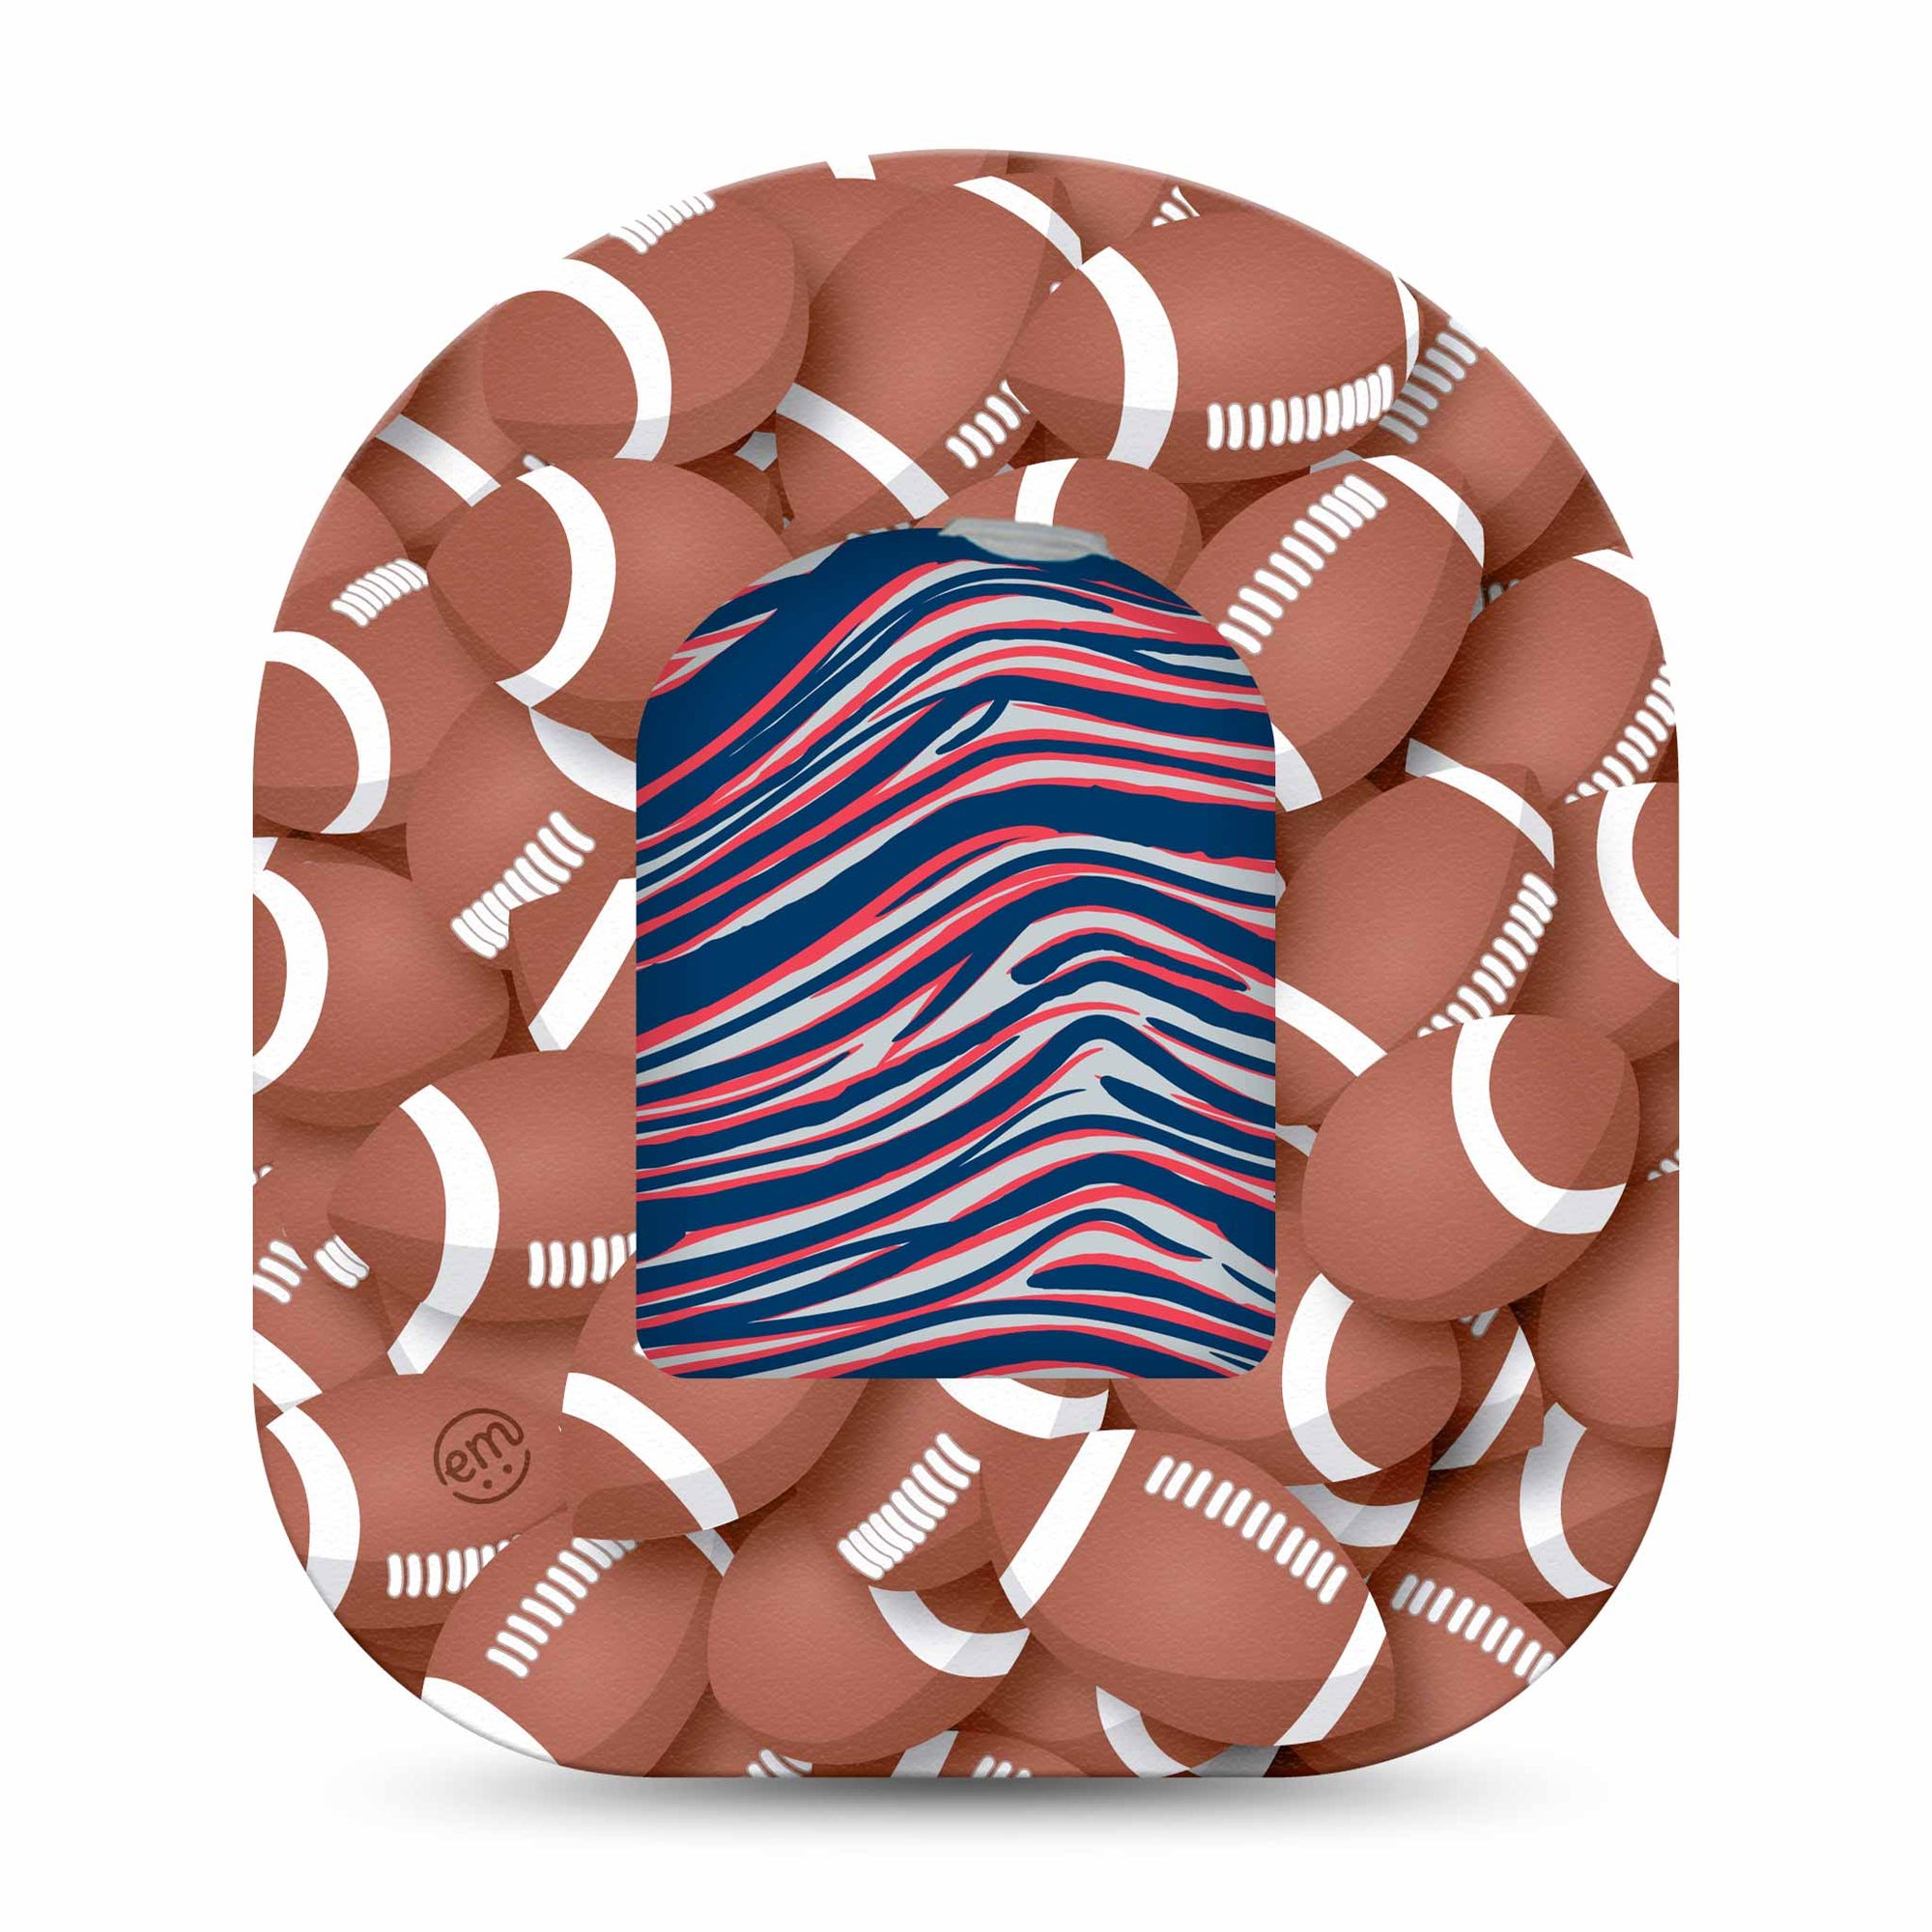 ExpressionMed Navy Blue, Red, and Silver Patriots Team Spirit Omnipod Sticker and Football Patch